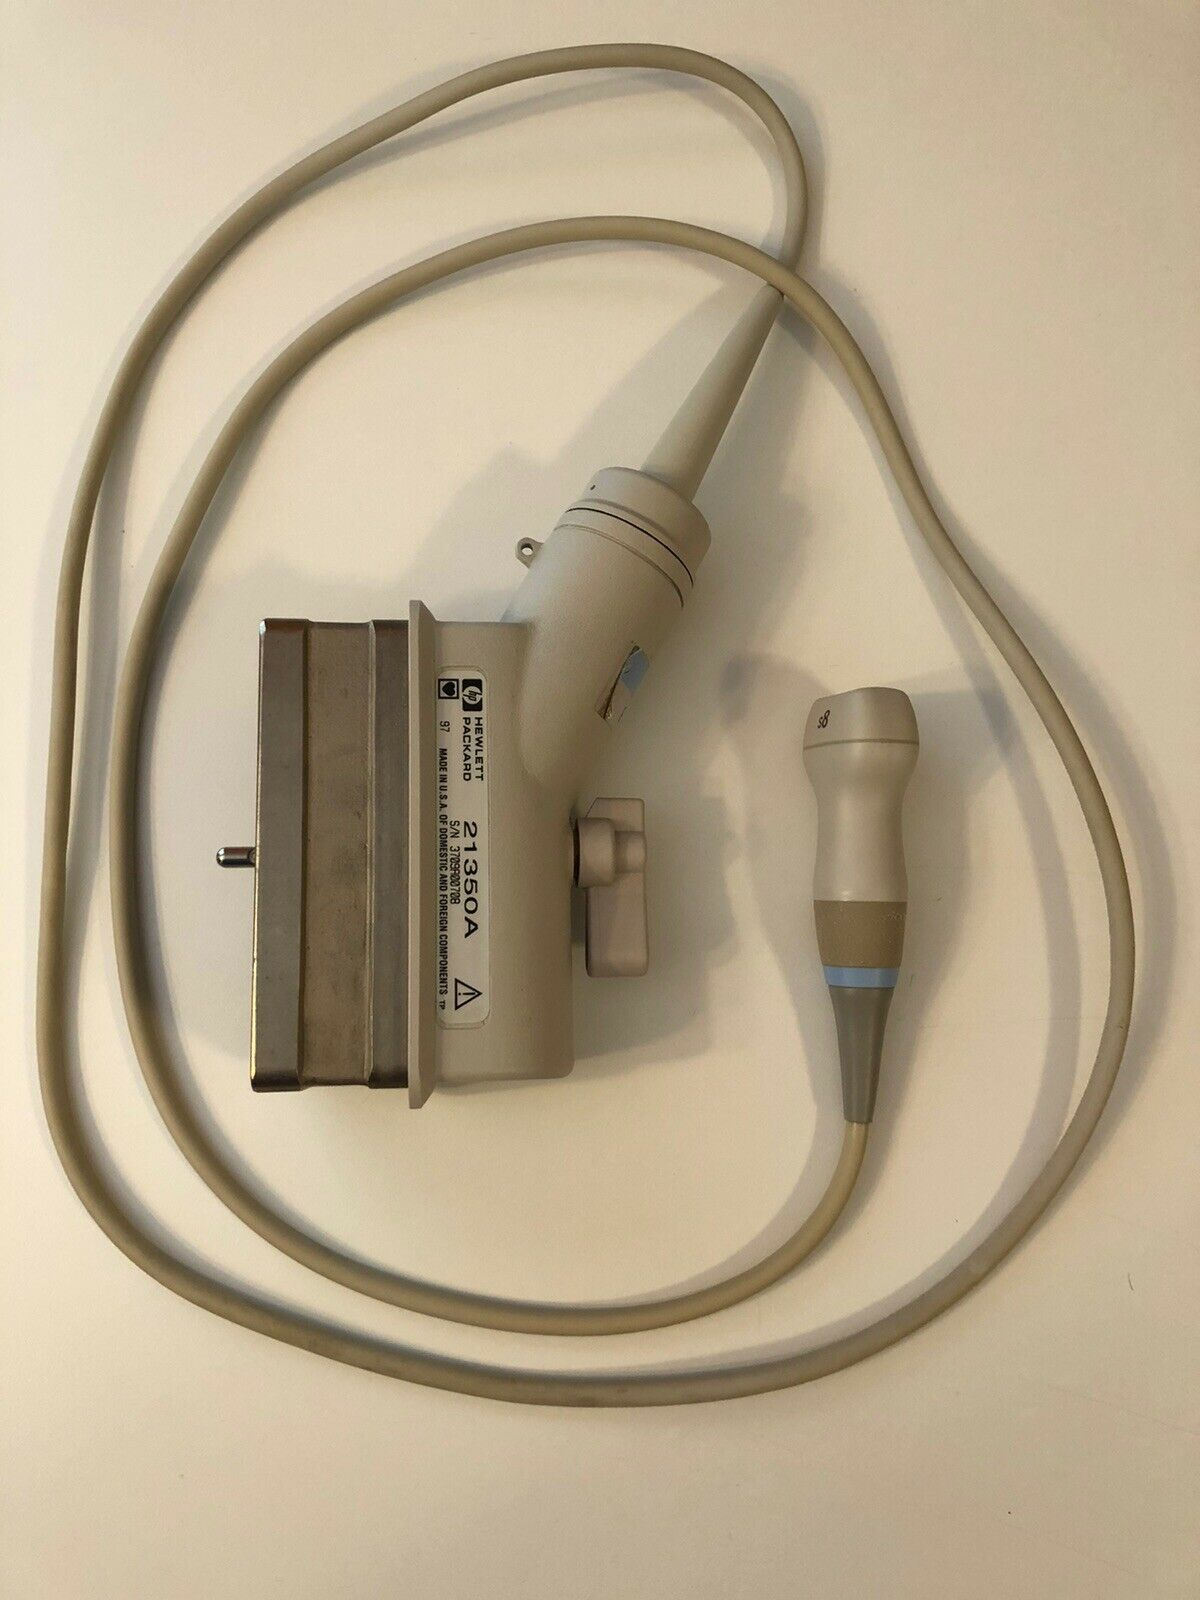 HP S8 21350A Ultrasound Transducer Probe DIAGNOSTIC ULTRASOUND MACHINES FOR SALE